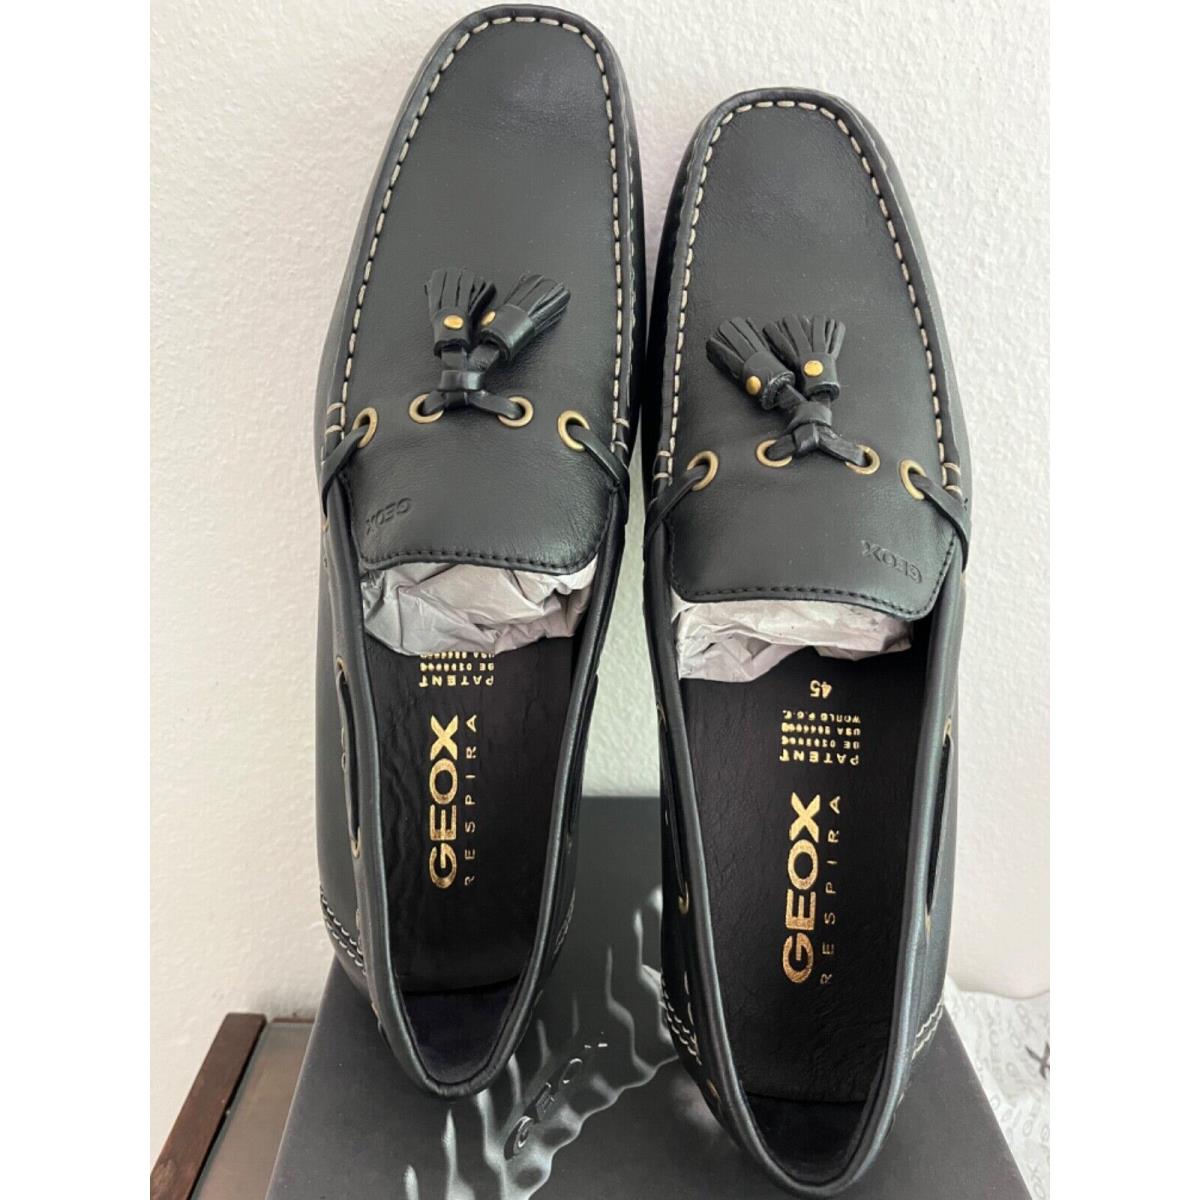 Geox Respira Driving Loafers Shoes Moccasin Black Leather w Tassel EU 45/US 12